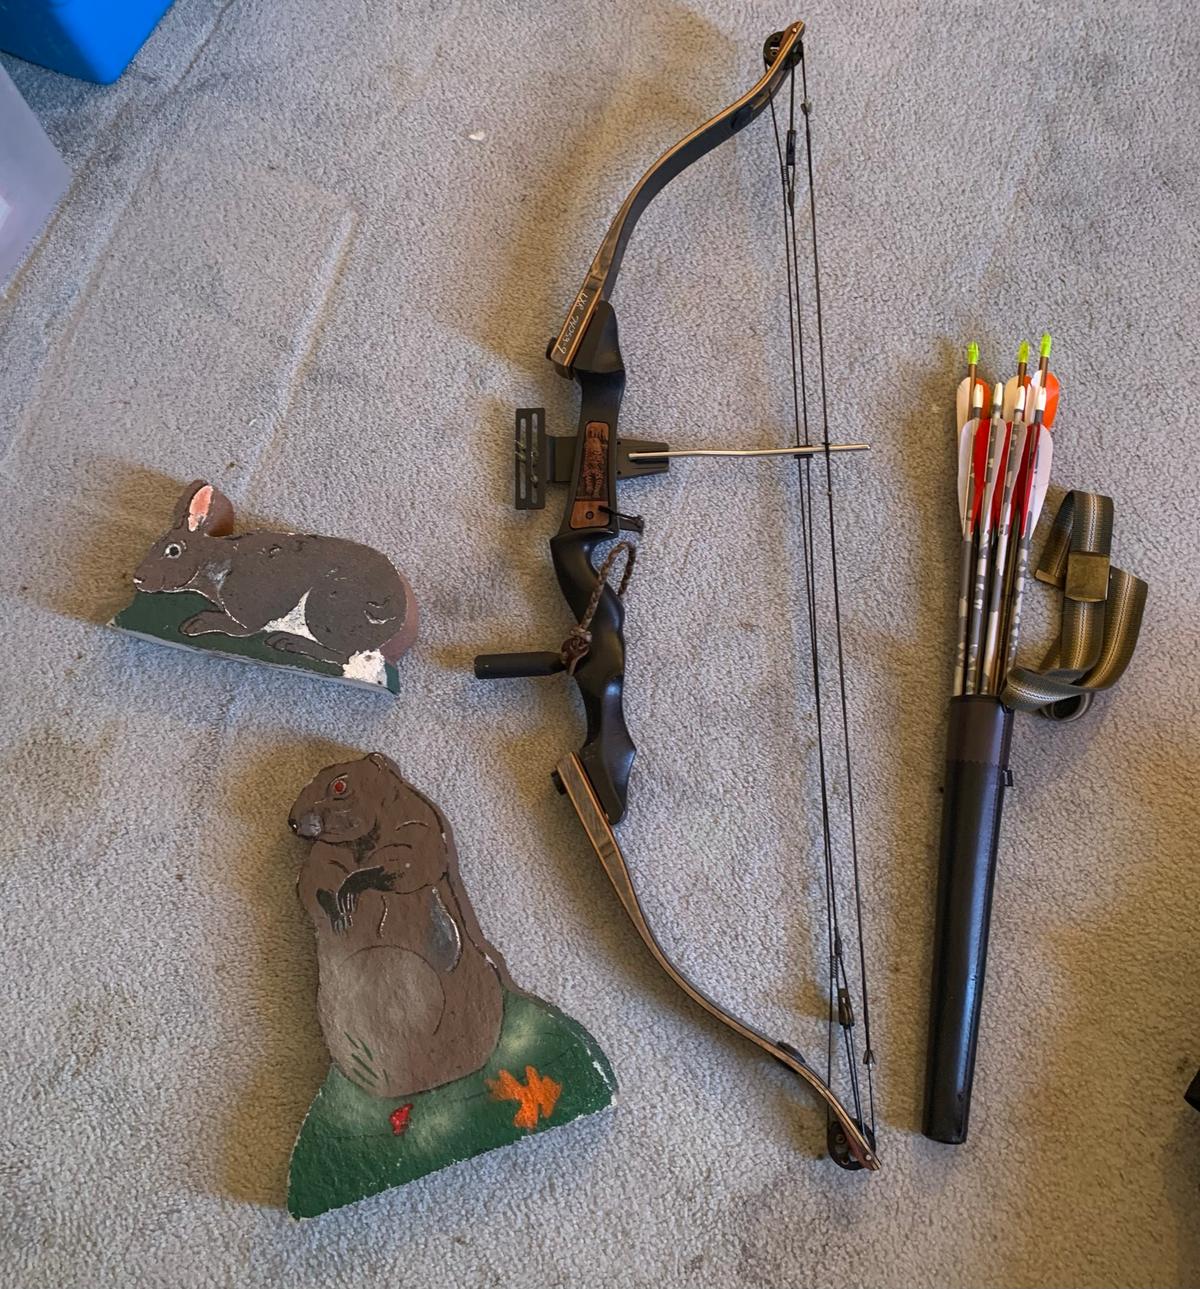 Martin Archery Inc. Compound Bow with Targets & Arrows